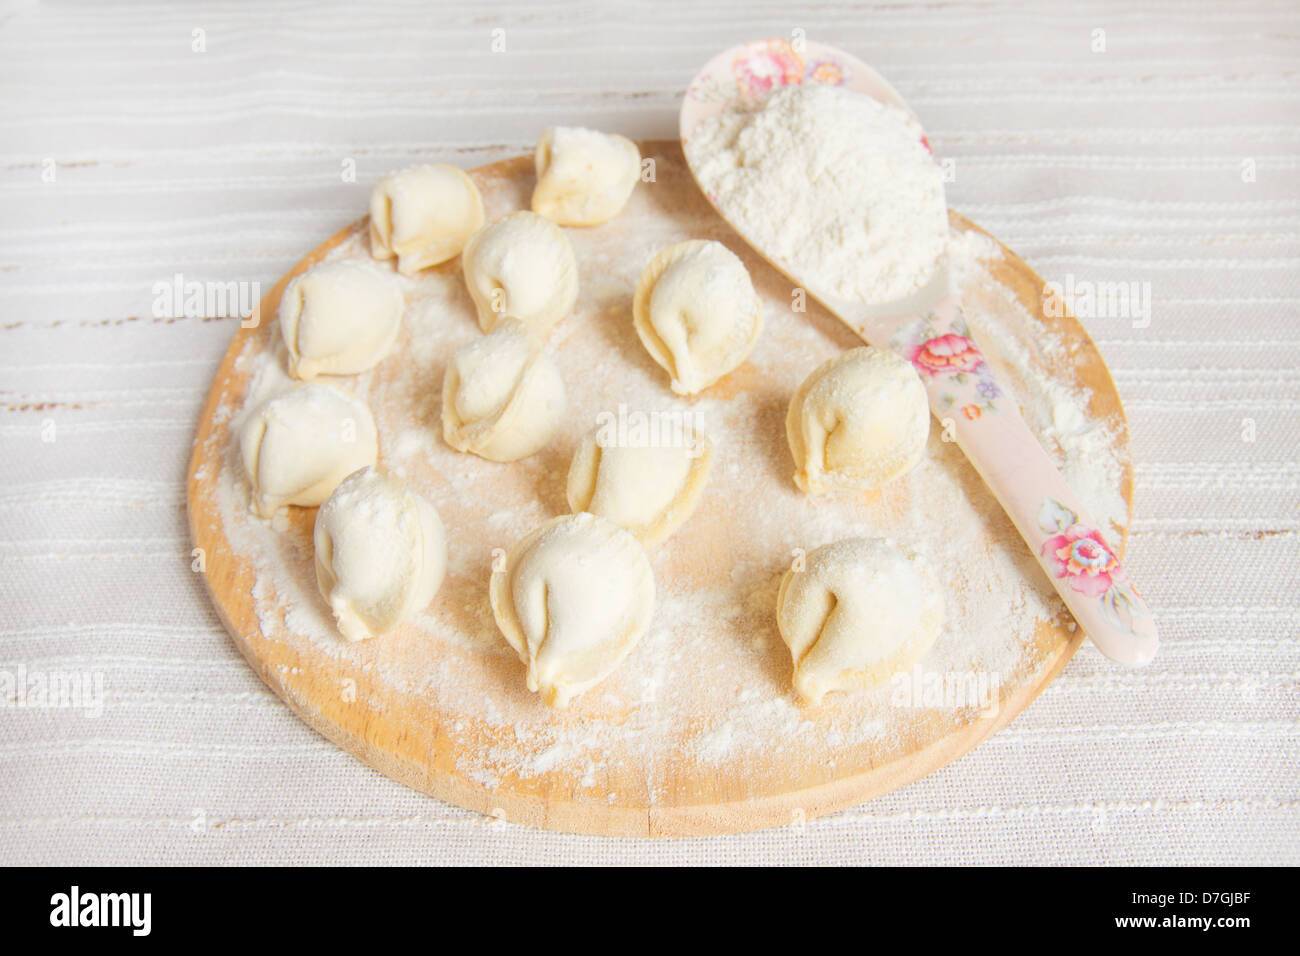 Uncooked dumplings (russian traditional food - pelmeni) on wooden cuting board with flour over linen background. Stock Photo